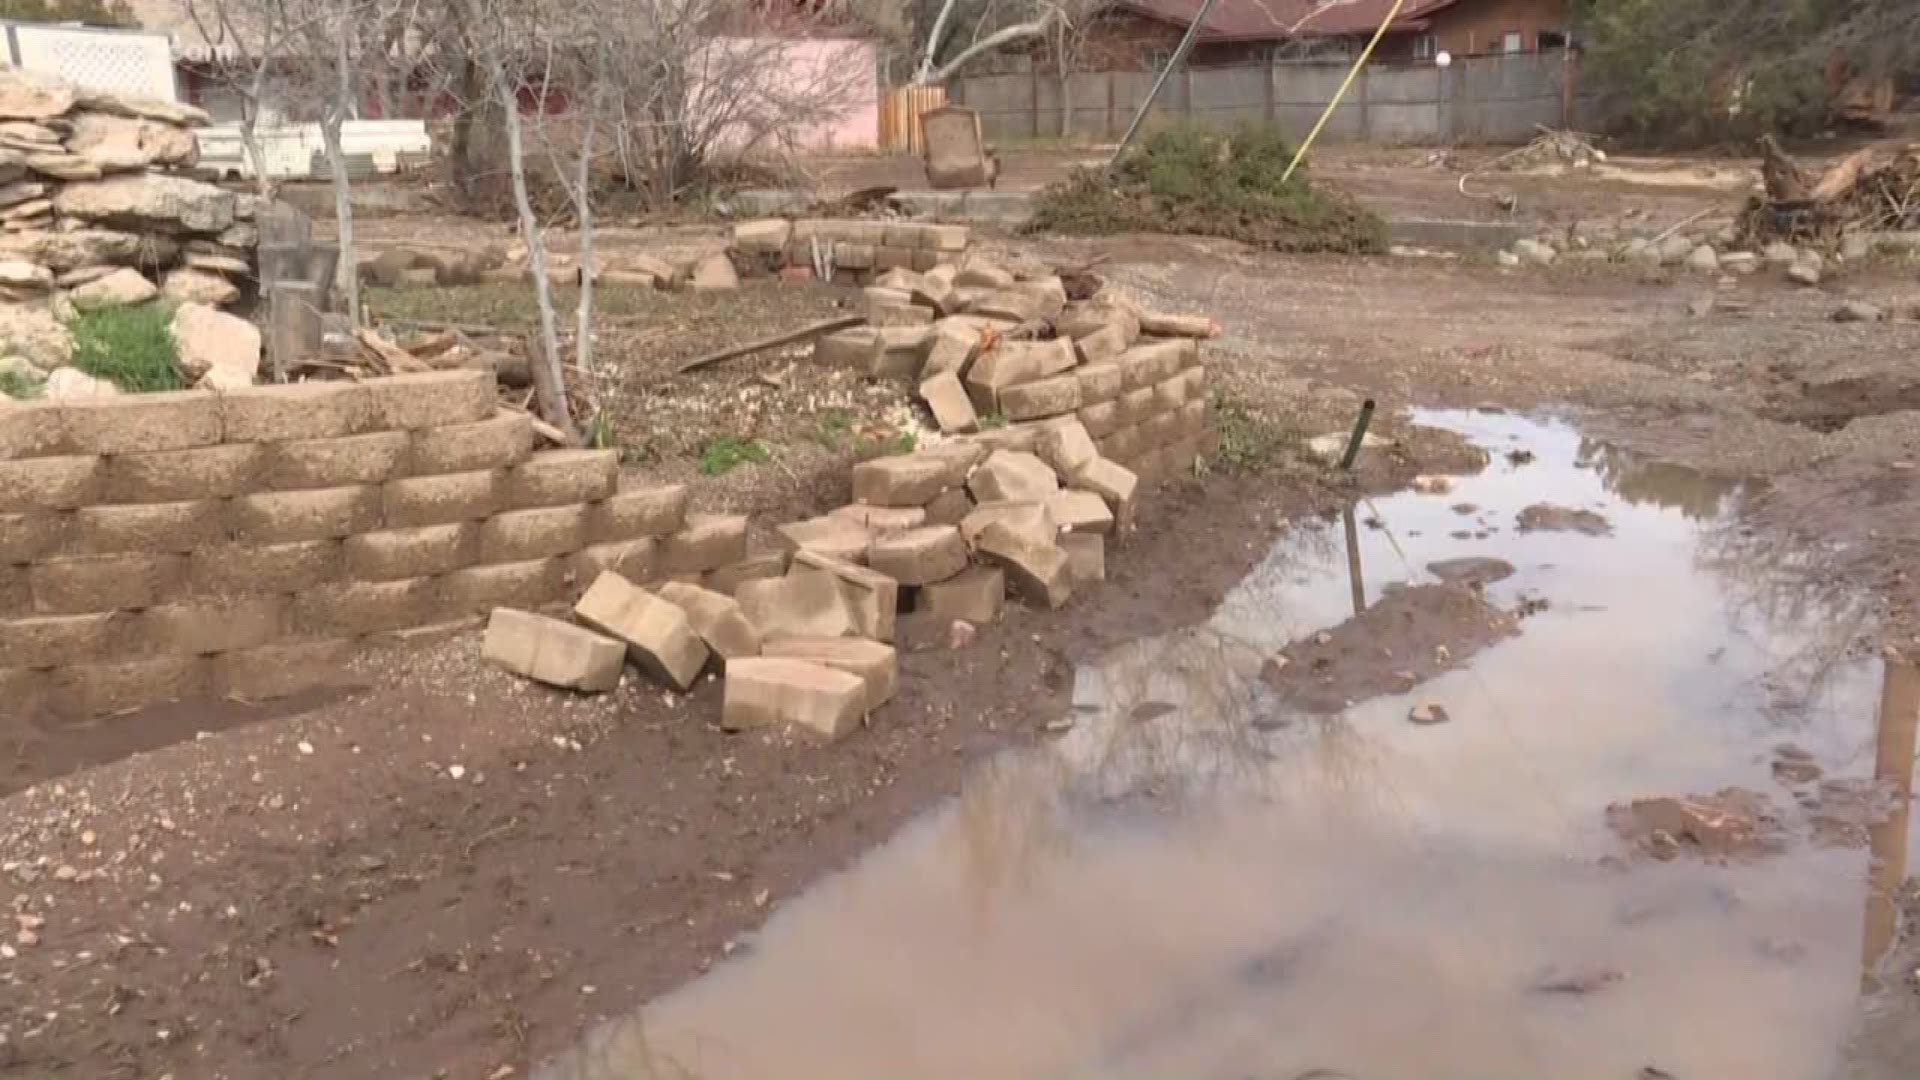 Flood waters from Beaver Creek rushed towards homes in Rimrock, forcing many to evacuate their homes. Families can't stay in their homes for now because of possible bacteria from the water and electrical issues.